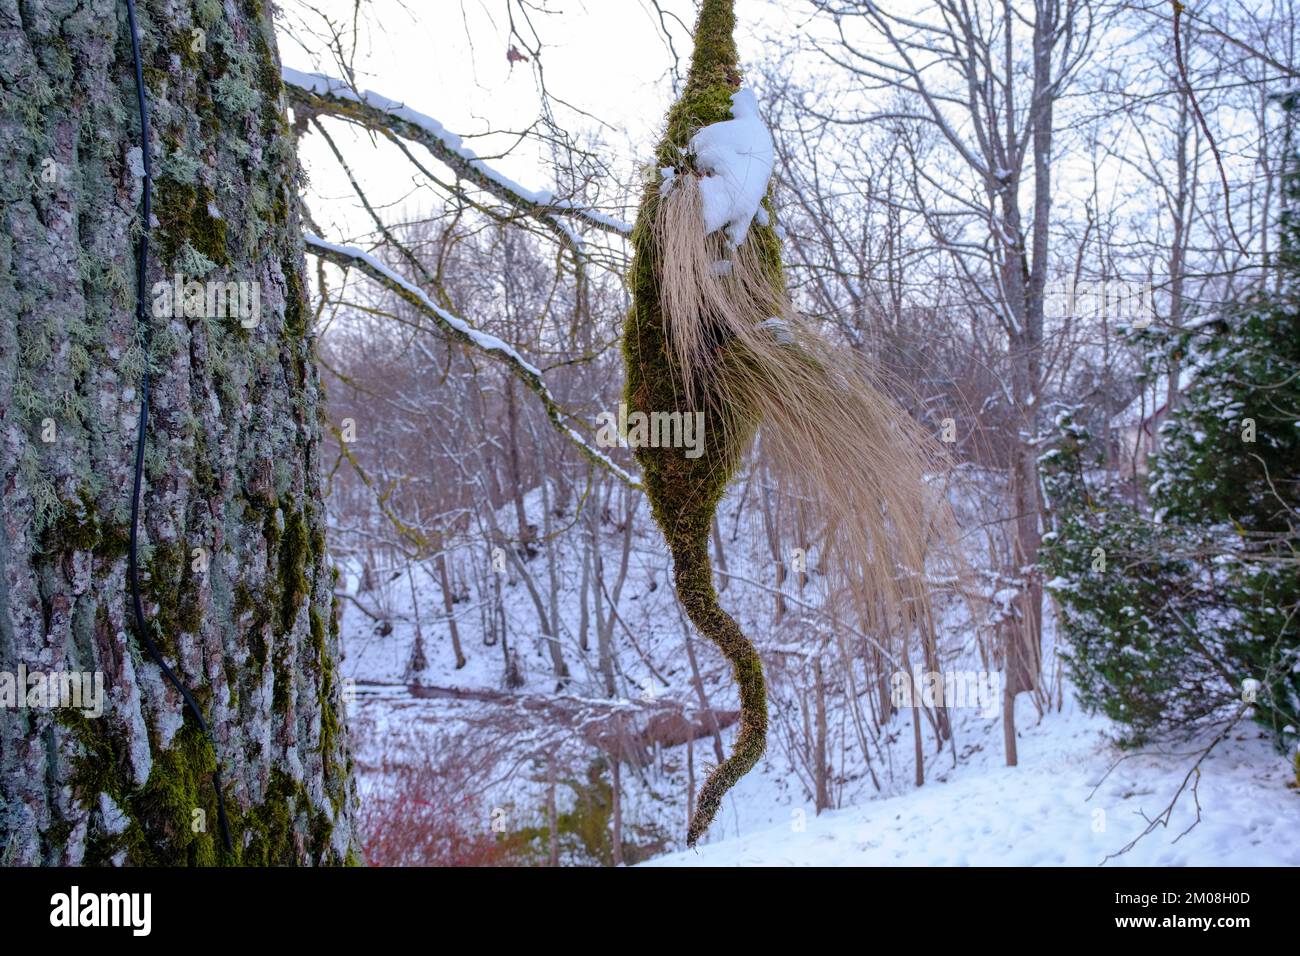 Late night . Evening twilight. a decor made of moss hung on a tree branch. Stock Photo